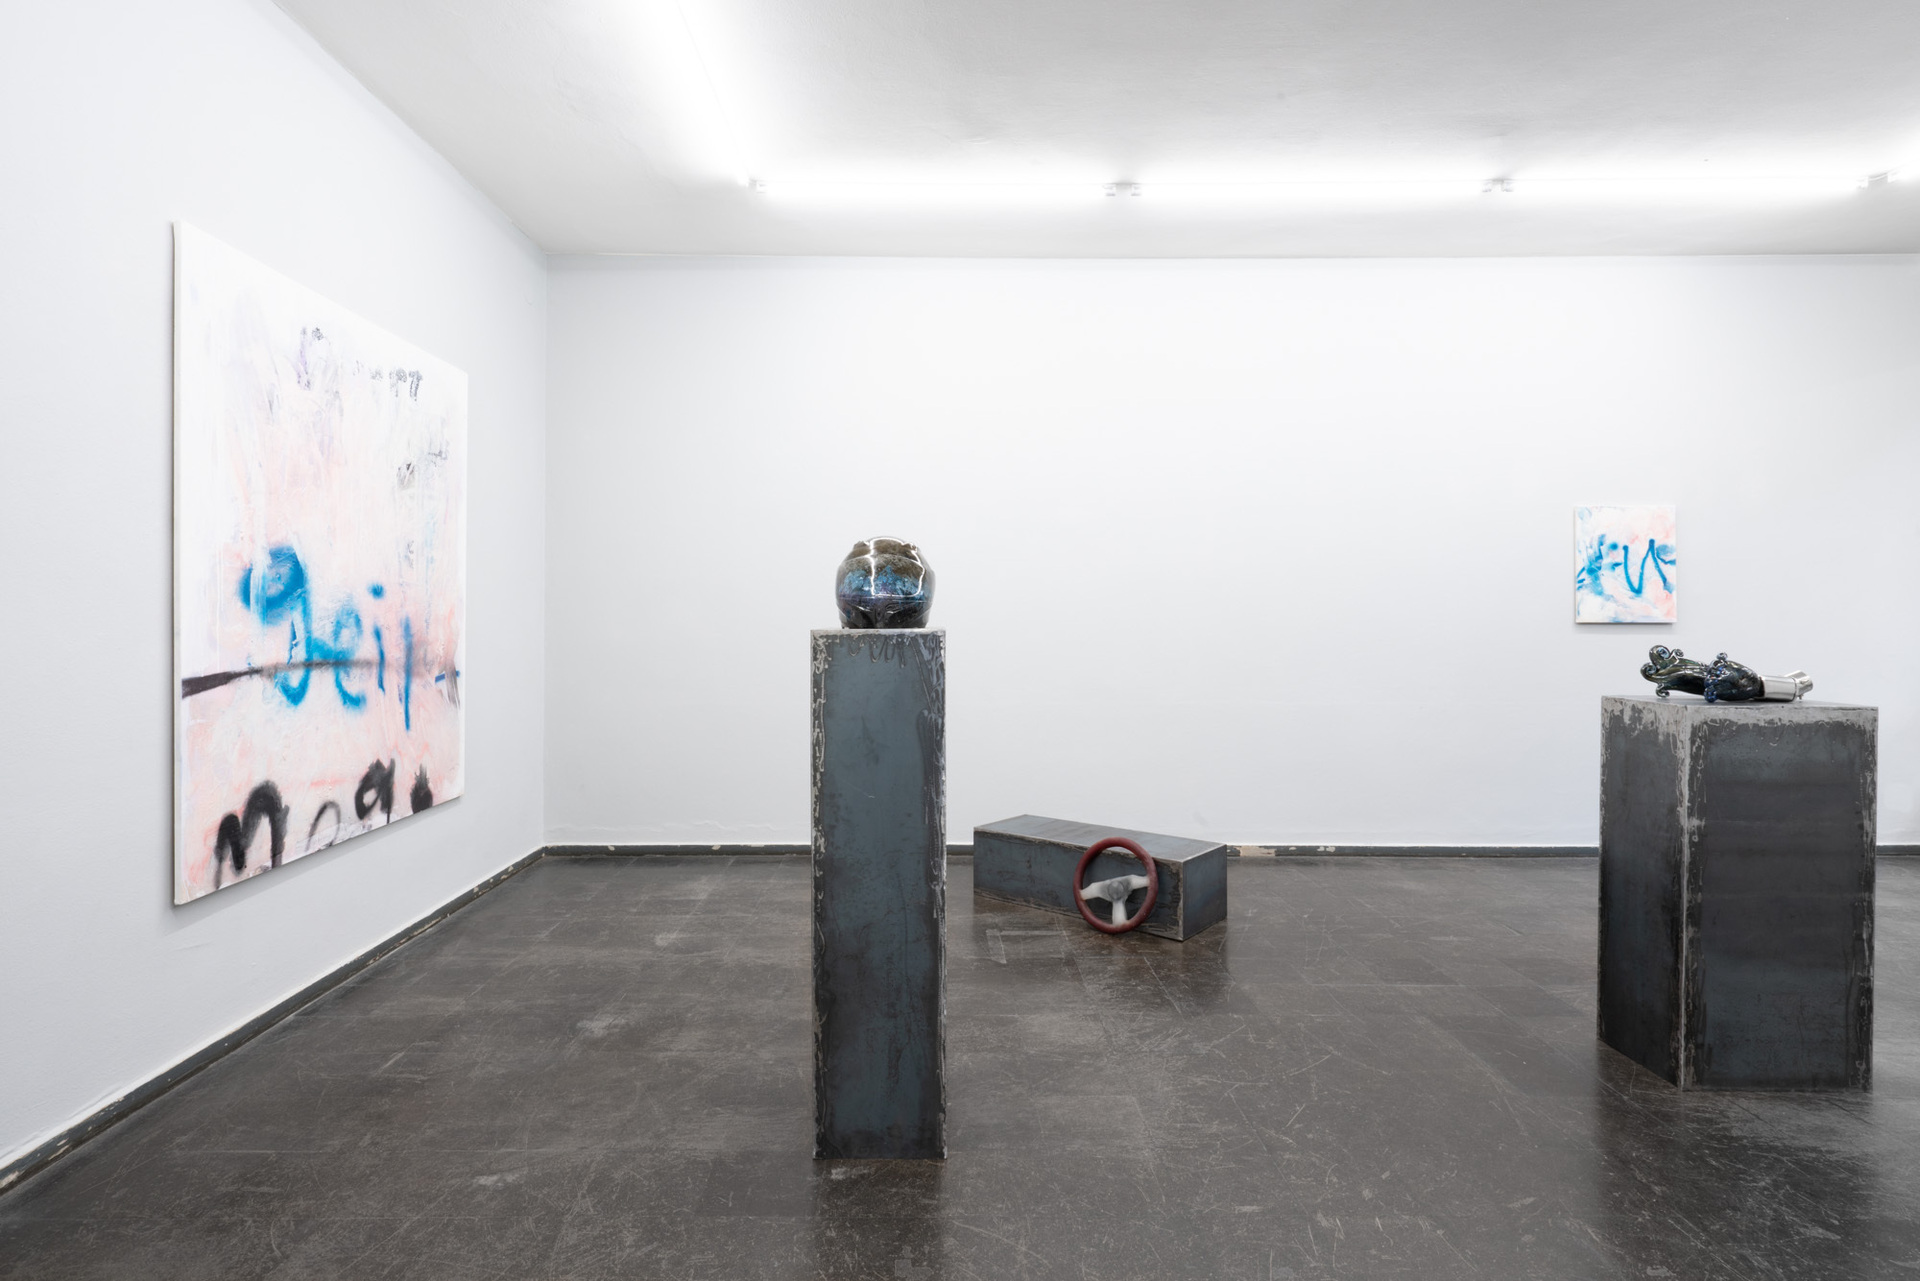 Installation Photo from the series Pleasure Drive From left to right:   ALANA LAKE, Mega Geil, 2020,  Emulsion, pigment, spray paint and epoxy on canvas,  180 x 160 cm  Black and Blue, 2019 Cast Glass, hand polished,  22 x 35.5 x 24 cm  Free Wheel, 2021 Cast Glass 35 X 35 cm  Fuck, 2021 Emulsion, spray paint and epoxy on canvas,  60 x 50 cm  Smokin’, 2020 Metal and hand blown glass 40 x 17 x 15.5 cm